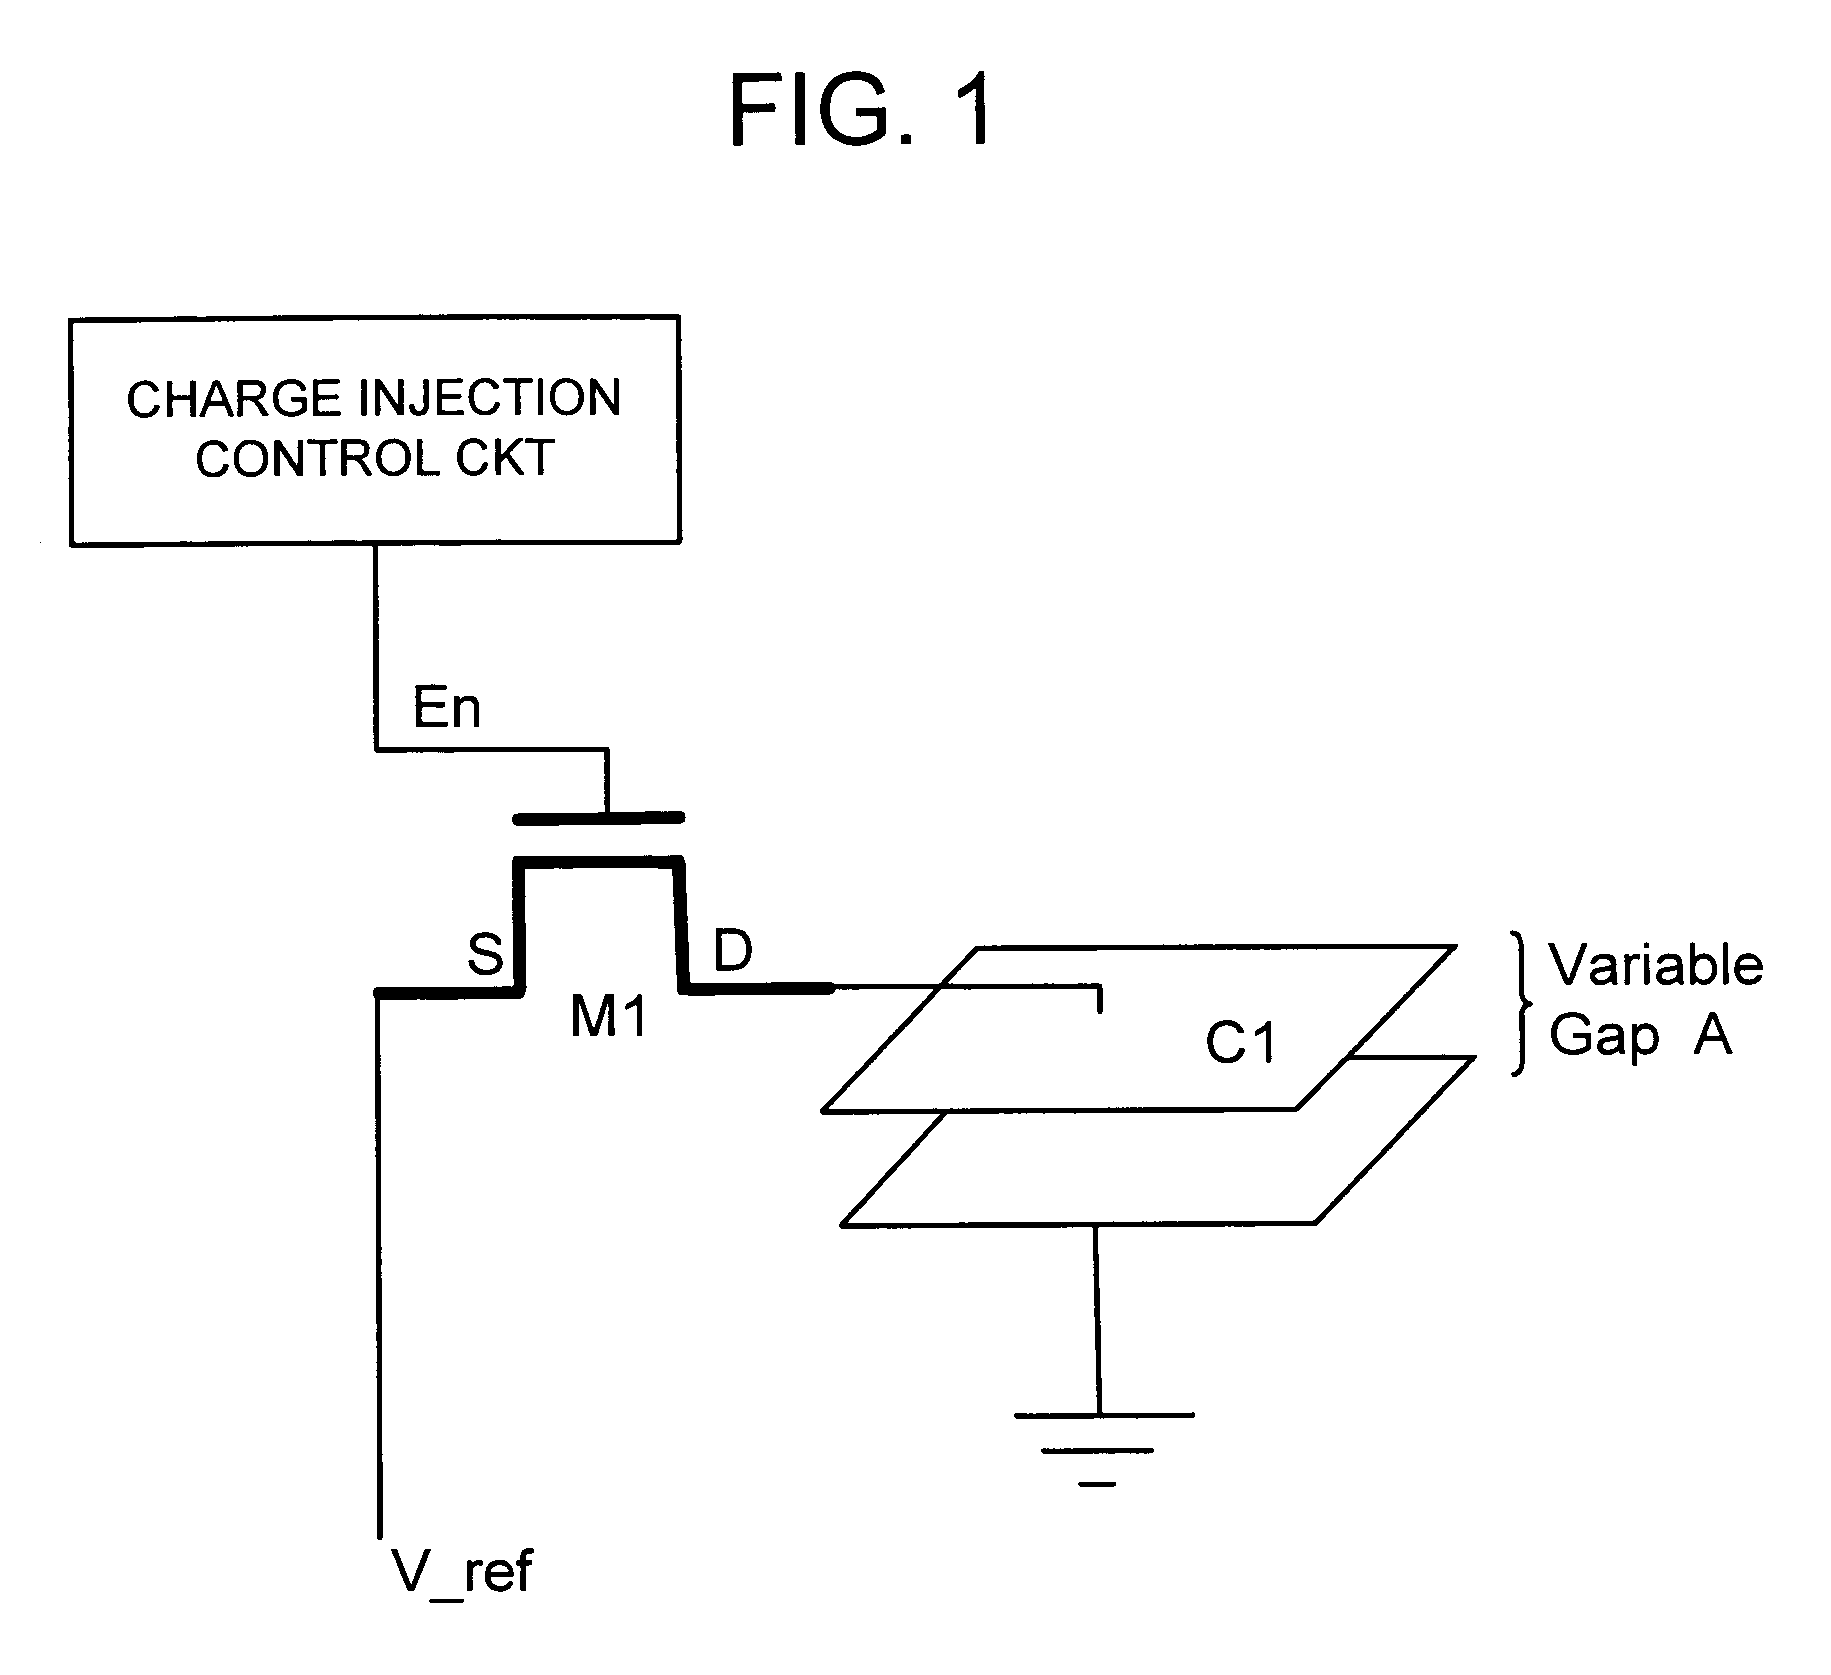 Method and apparatus for reducing charge injection in control of MEMS electrostatic actuator array